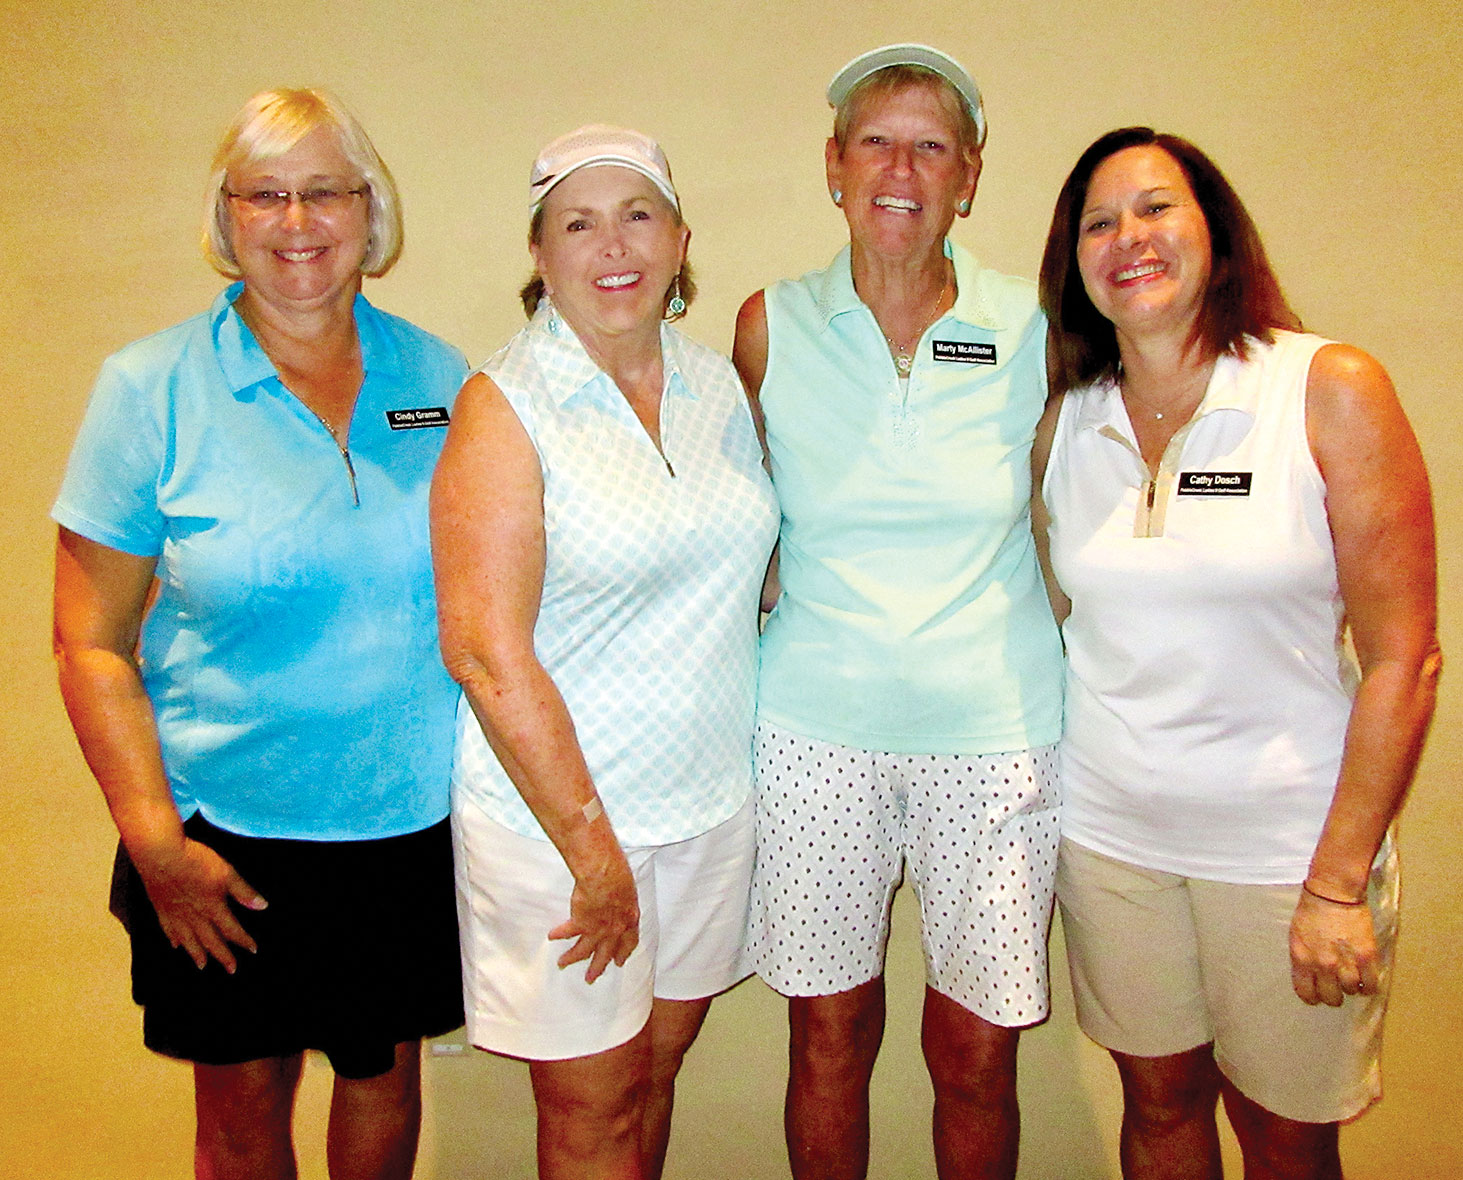 Diamond in the Rough — First Place Team, Eagle’s Nest Front: Cindy Gramm, Anna Schuchman, Marty McAllister, Cathy Dosch